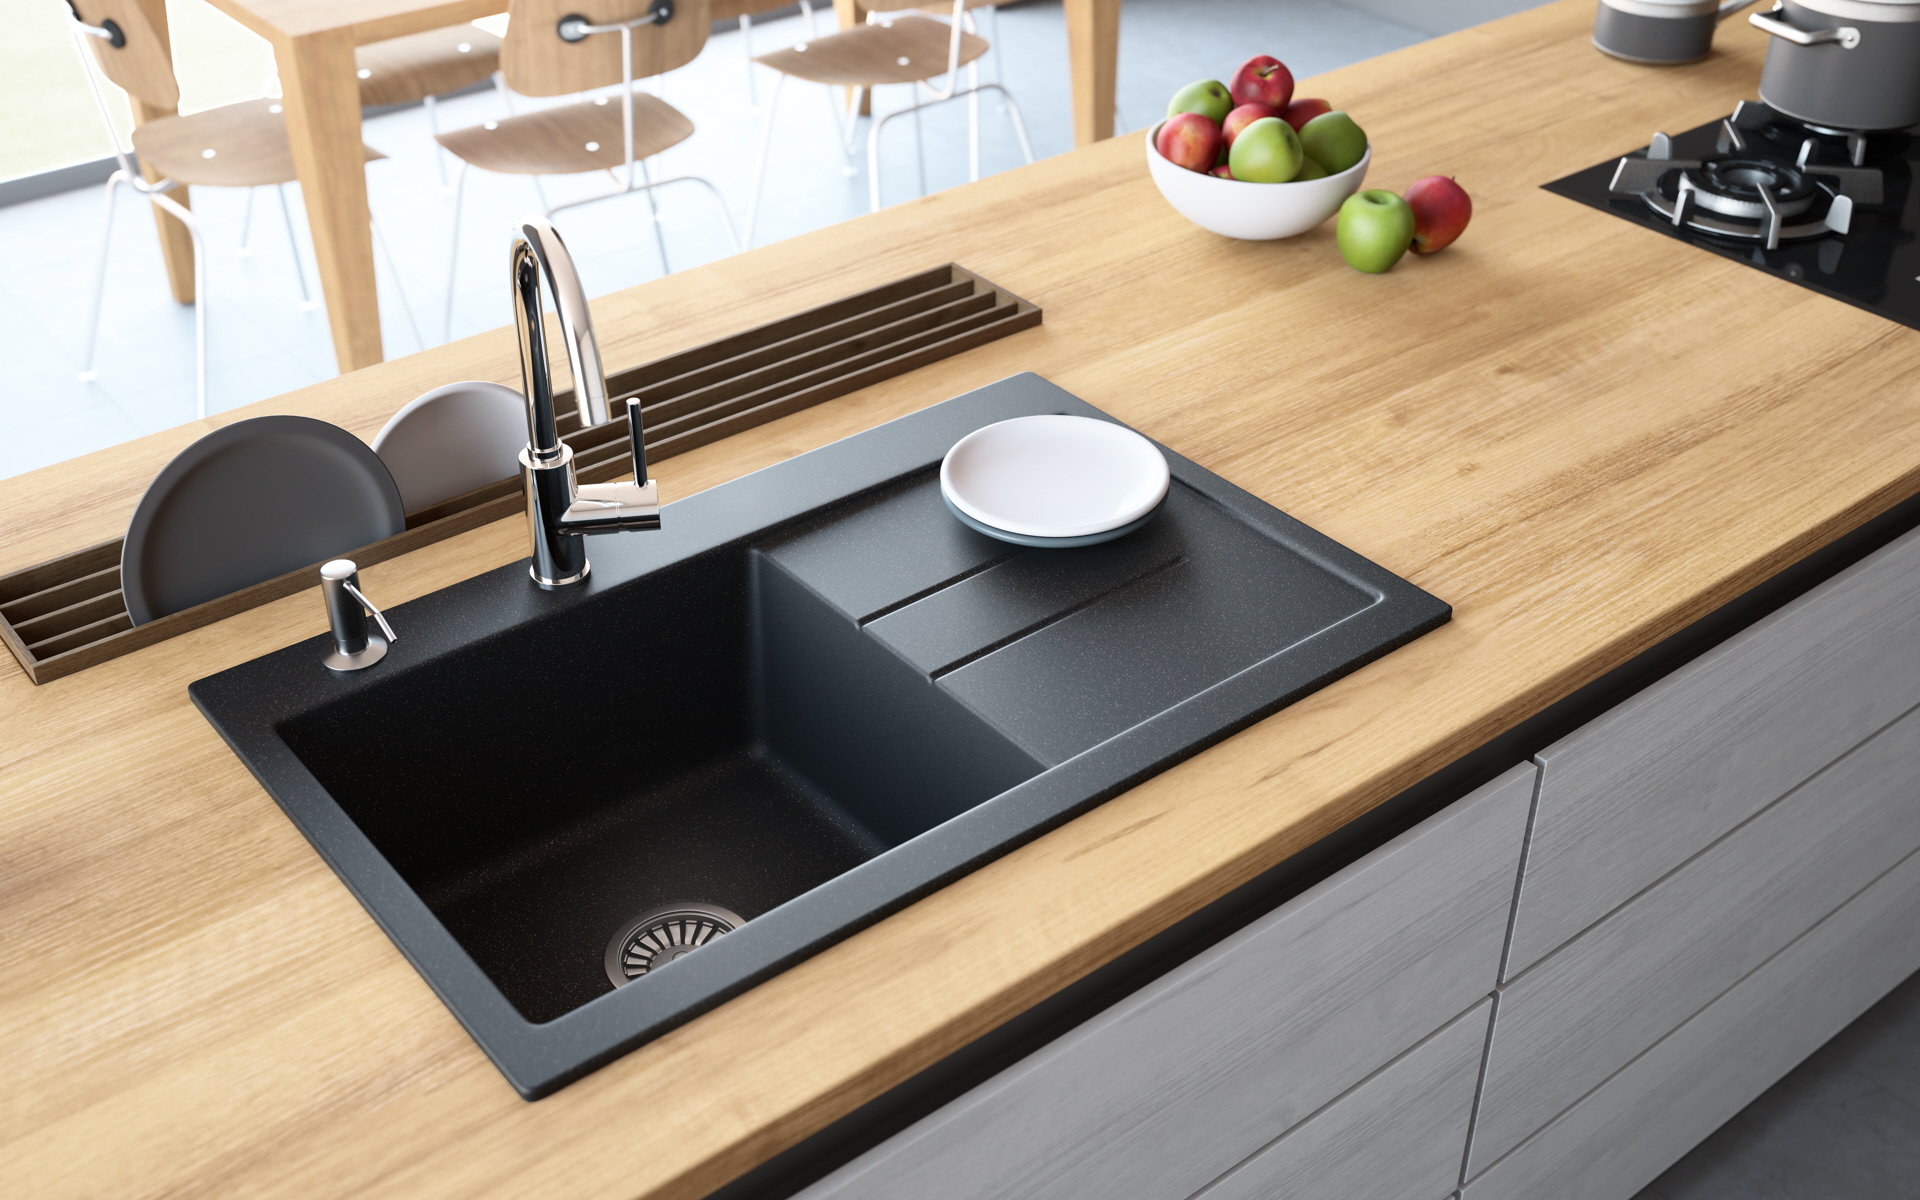 Creatice What Is The Most Common Kitchen Sink Size for Simple Design